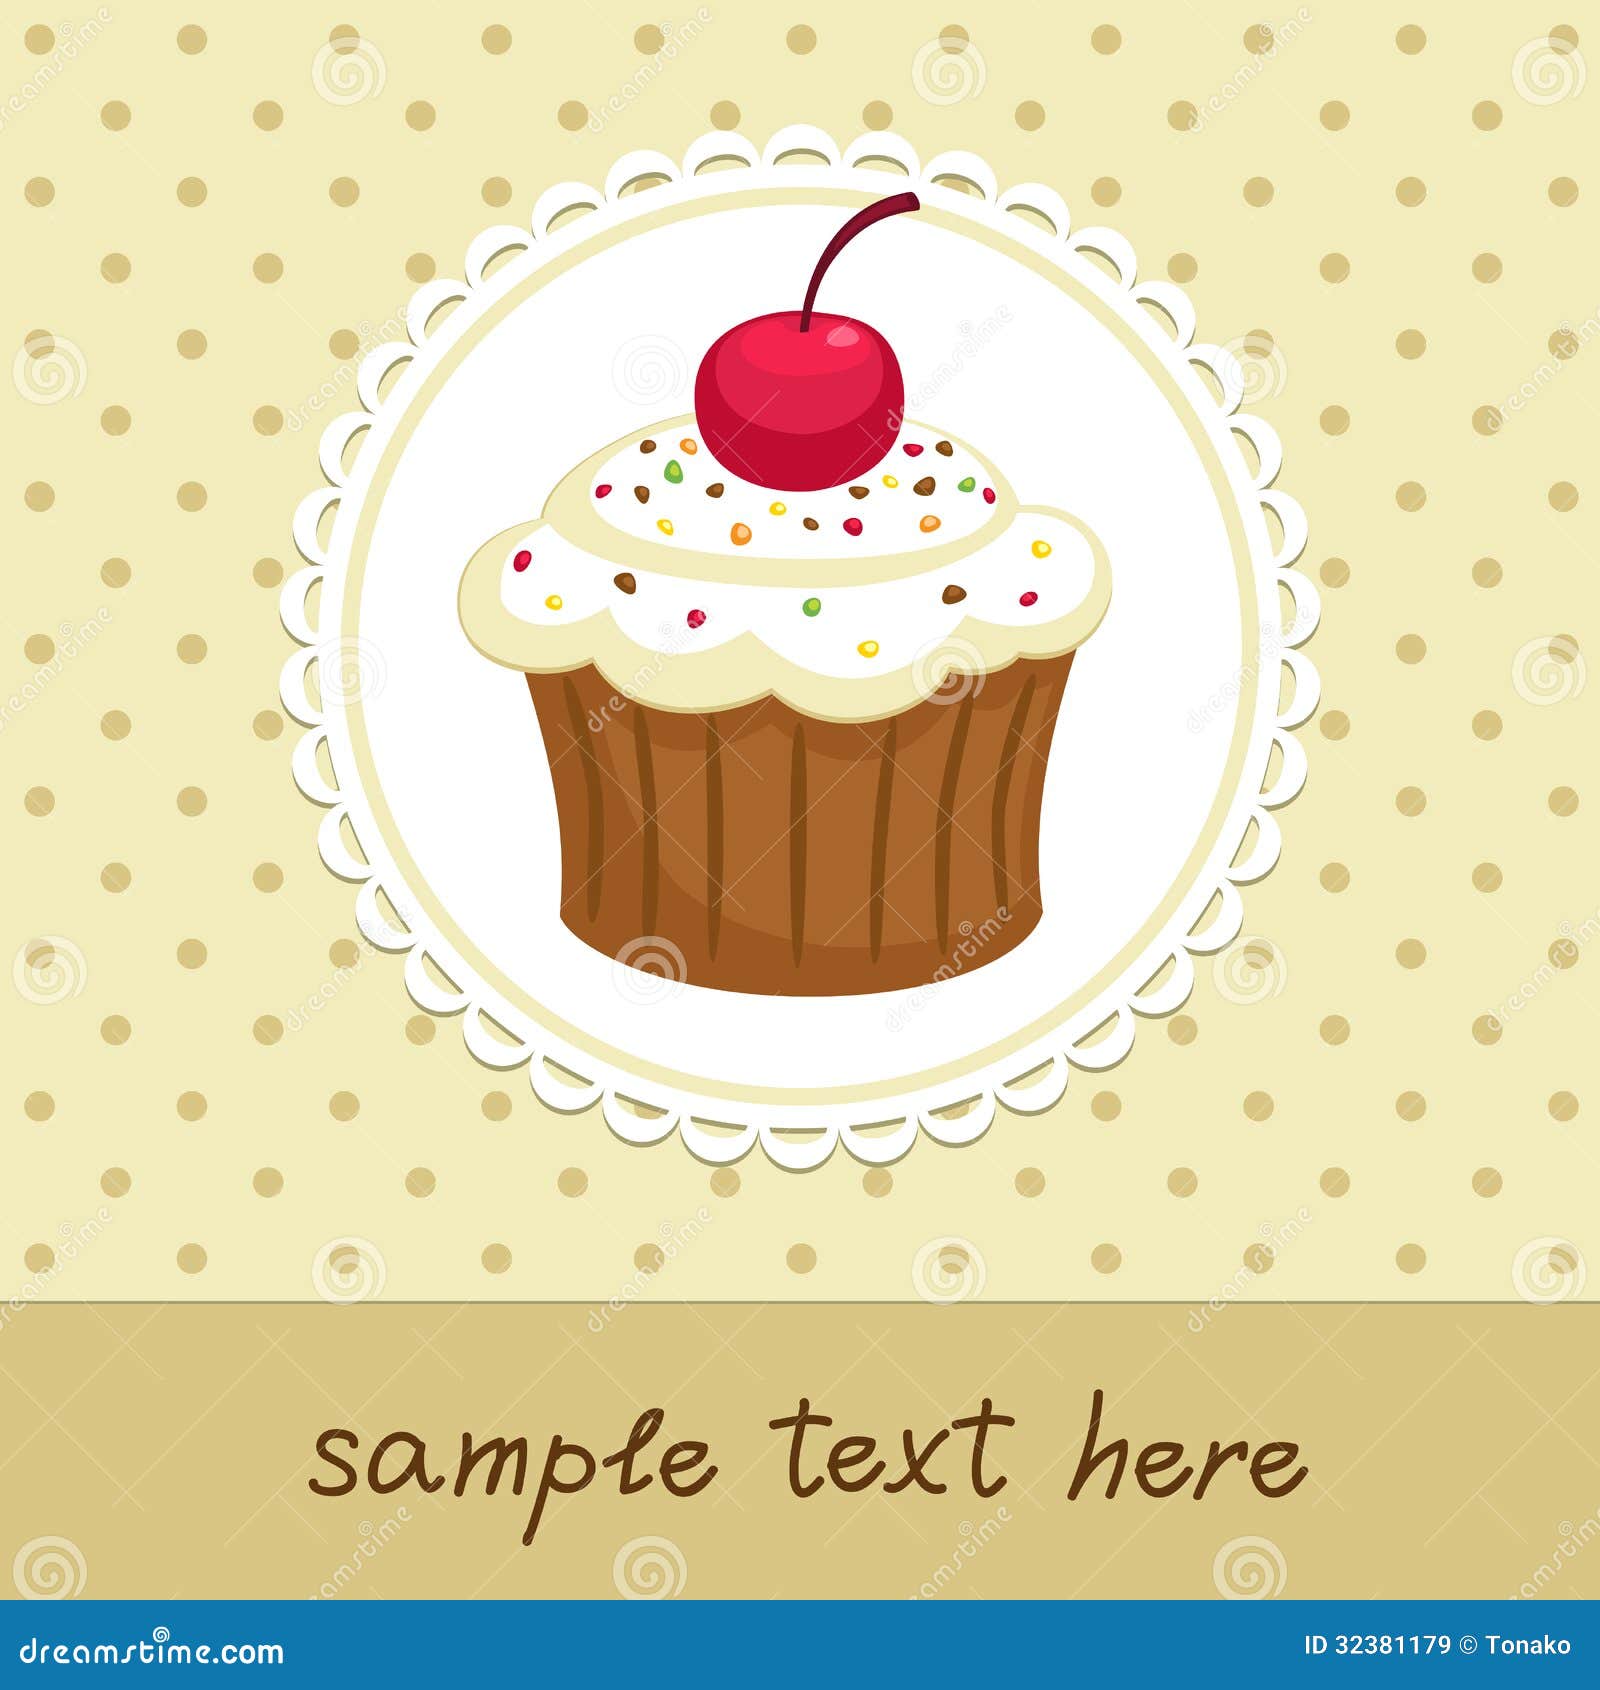 Invitation Vector Vintage  background cupcake. cupcake template. paper vintage   with